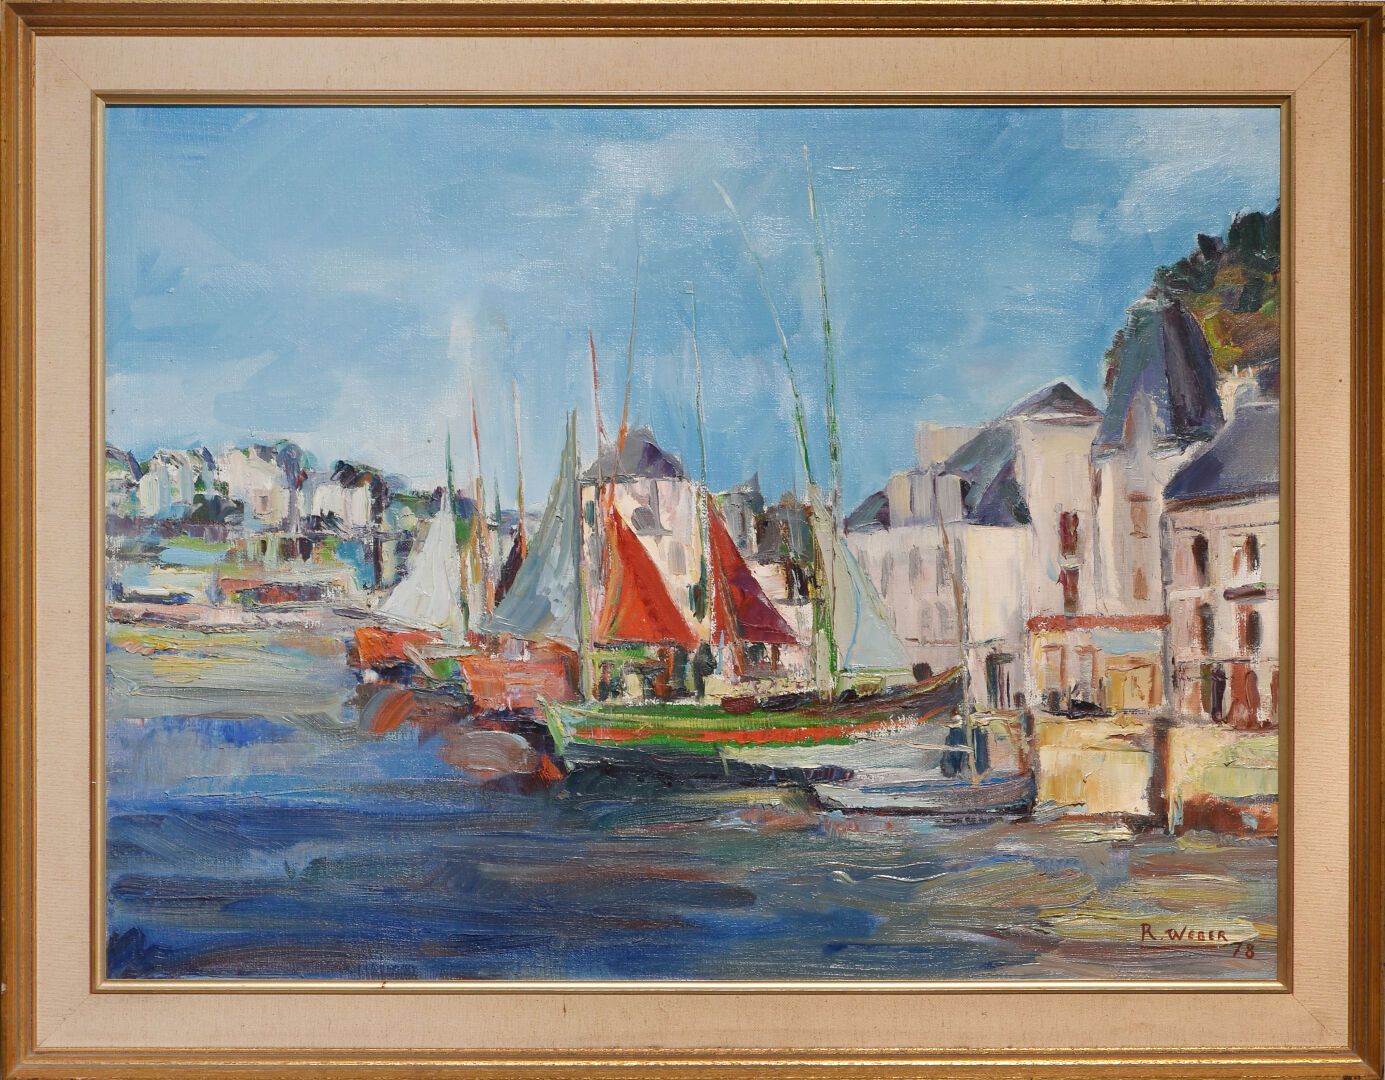 René WEBER (XXeme) Breton port,
Oil on canvas signed lower right and dated 78
Si&hellip;